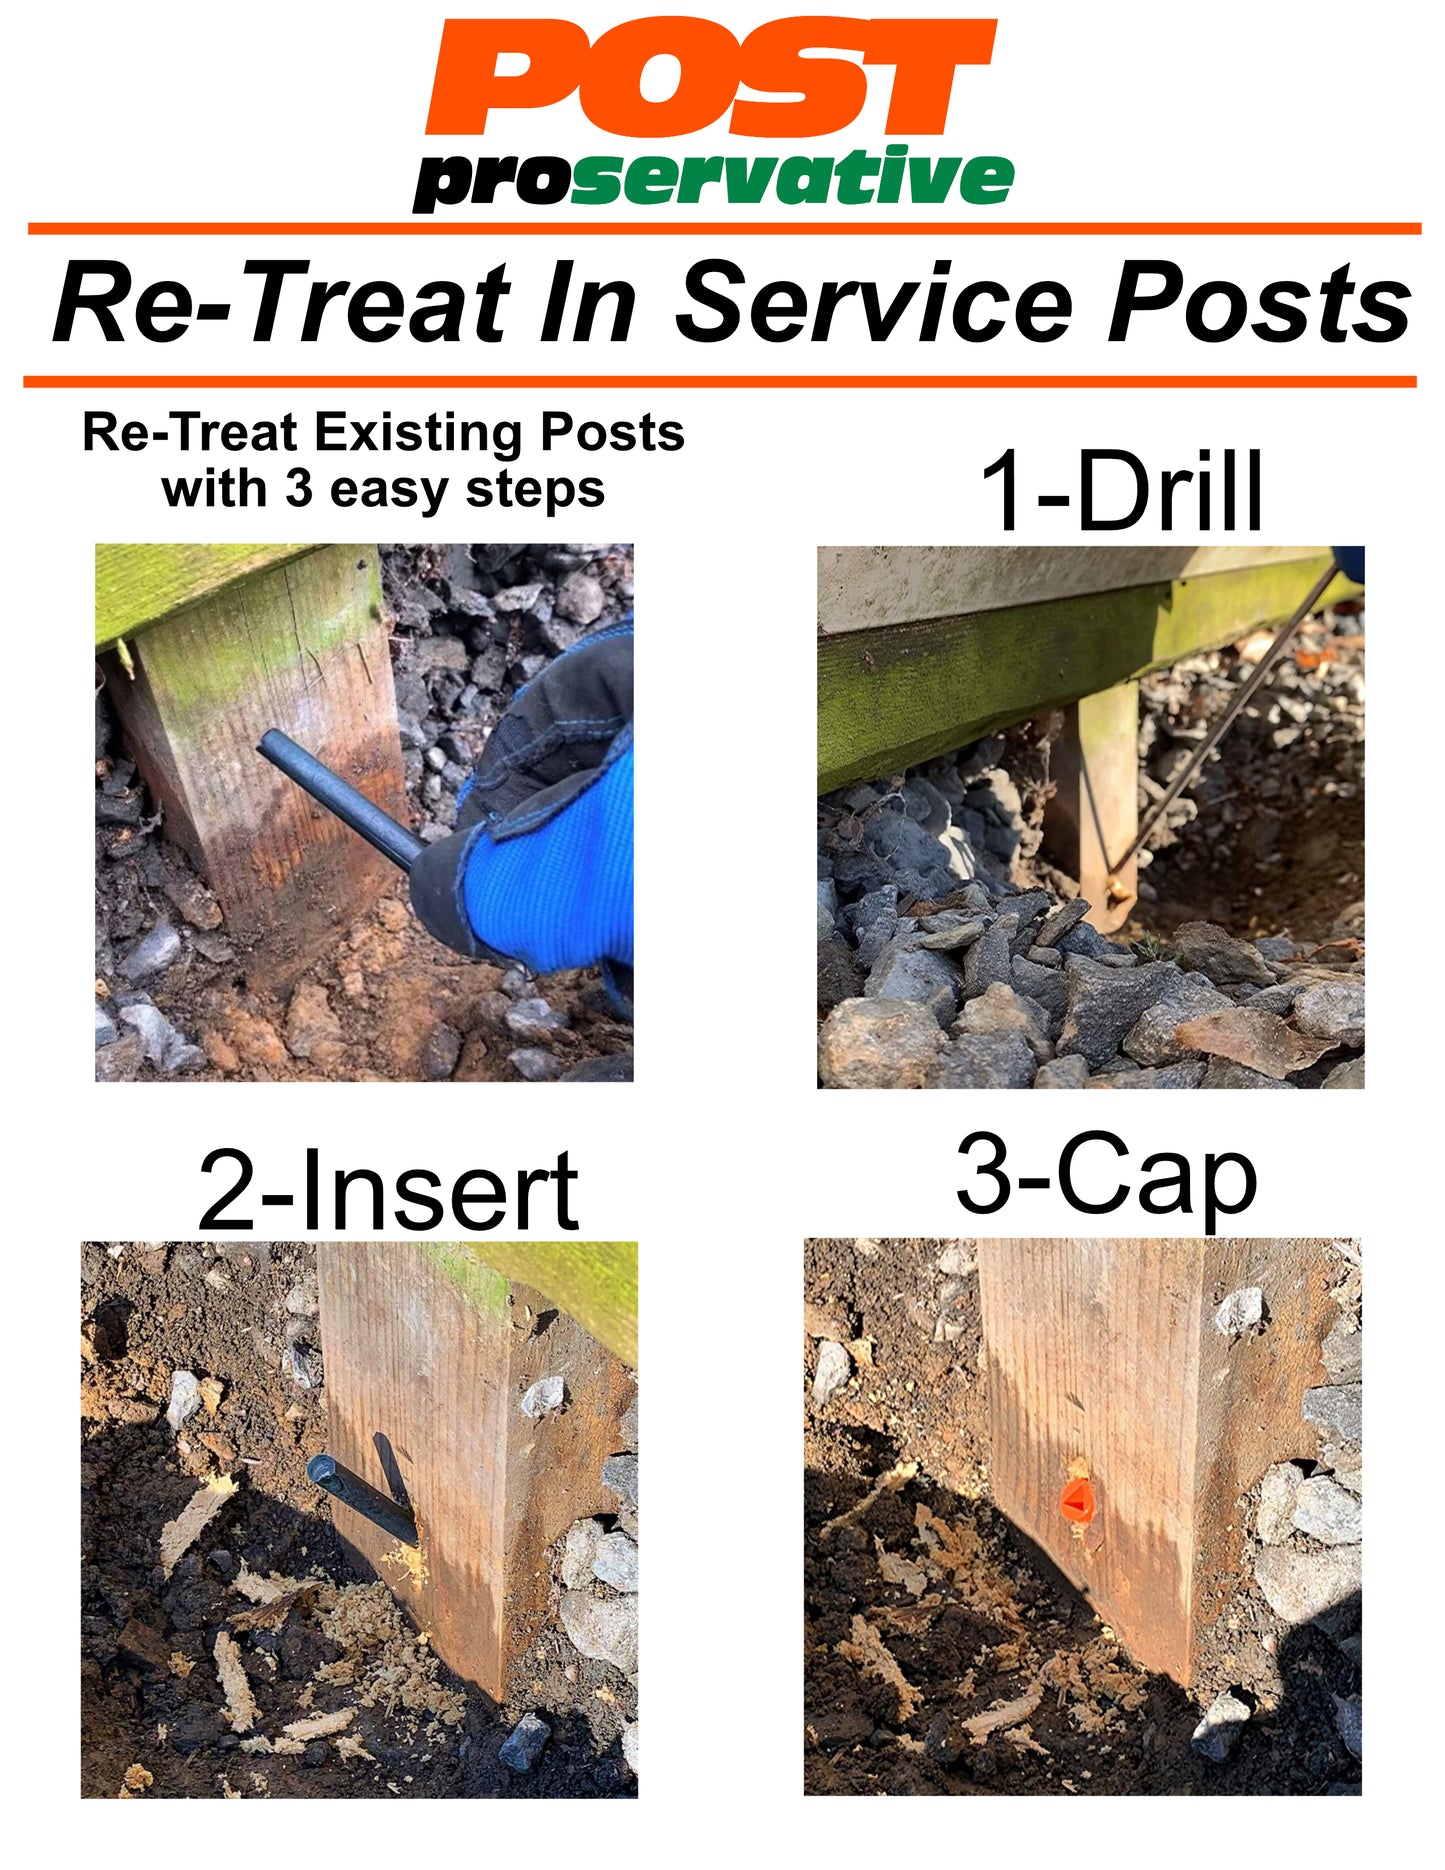 Post Proservative, Fence Repair Kit to Re-Treat existing posts